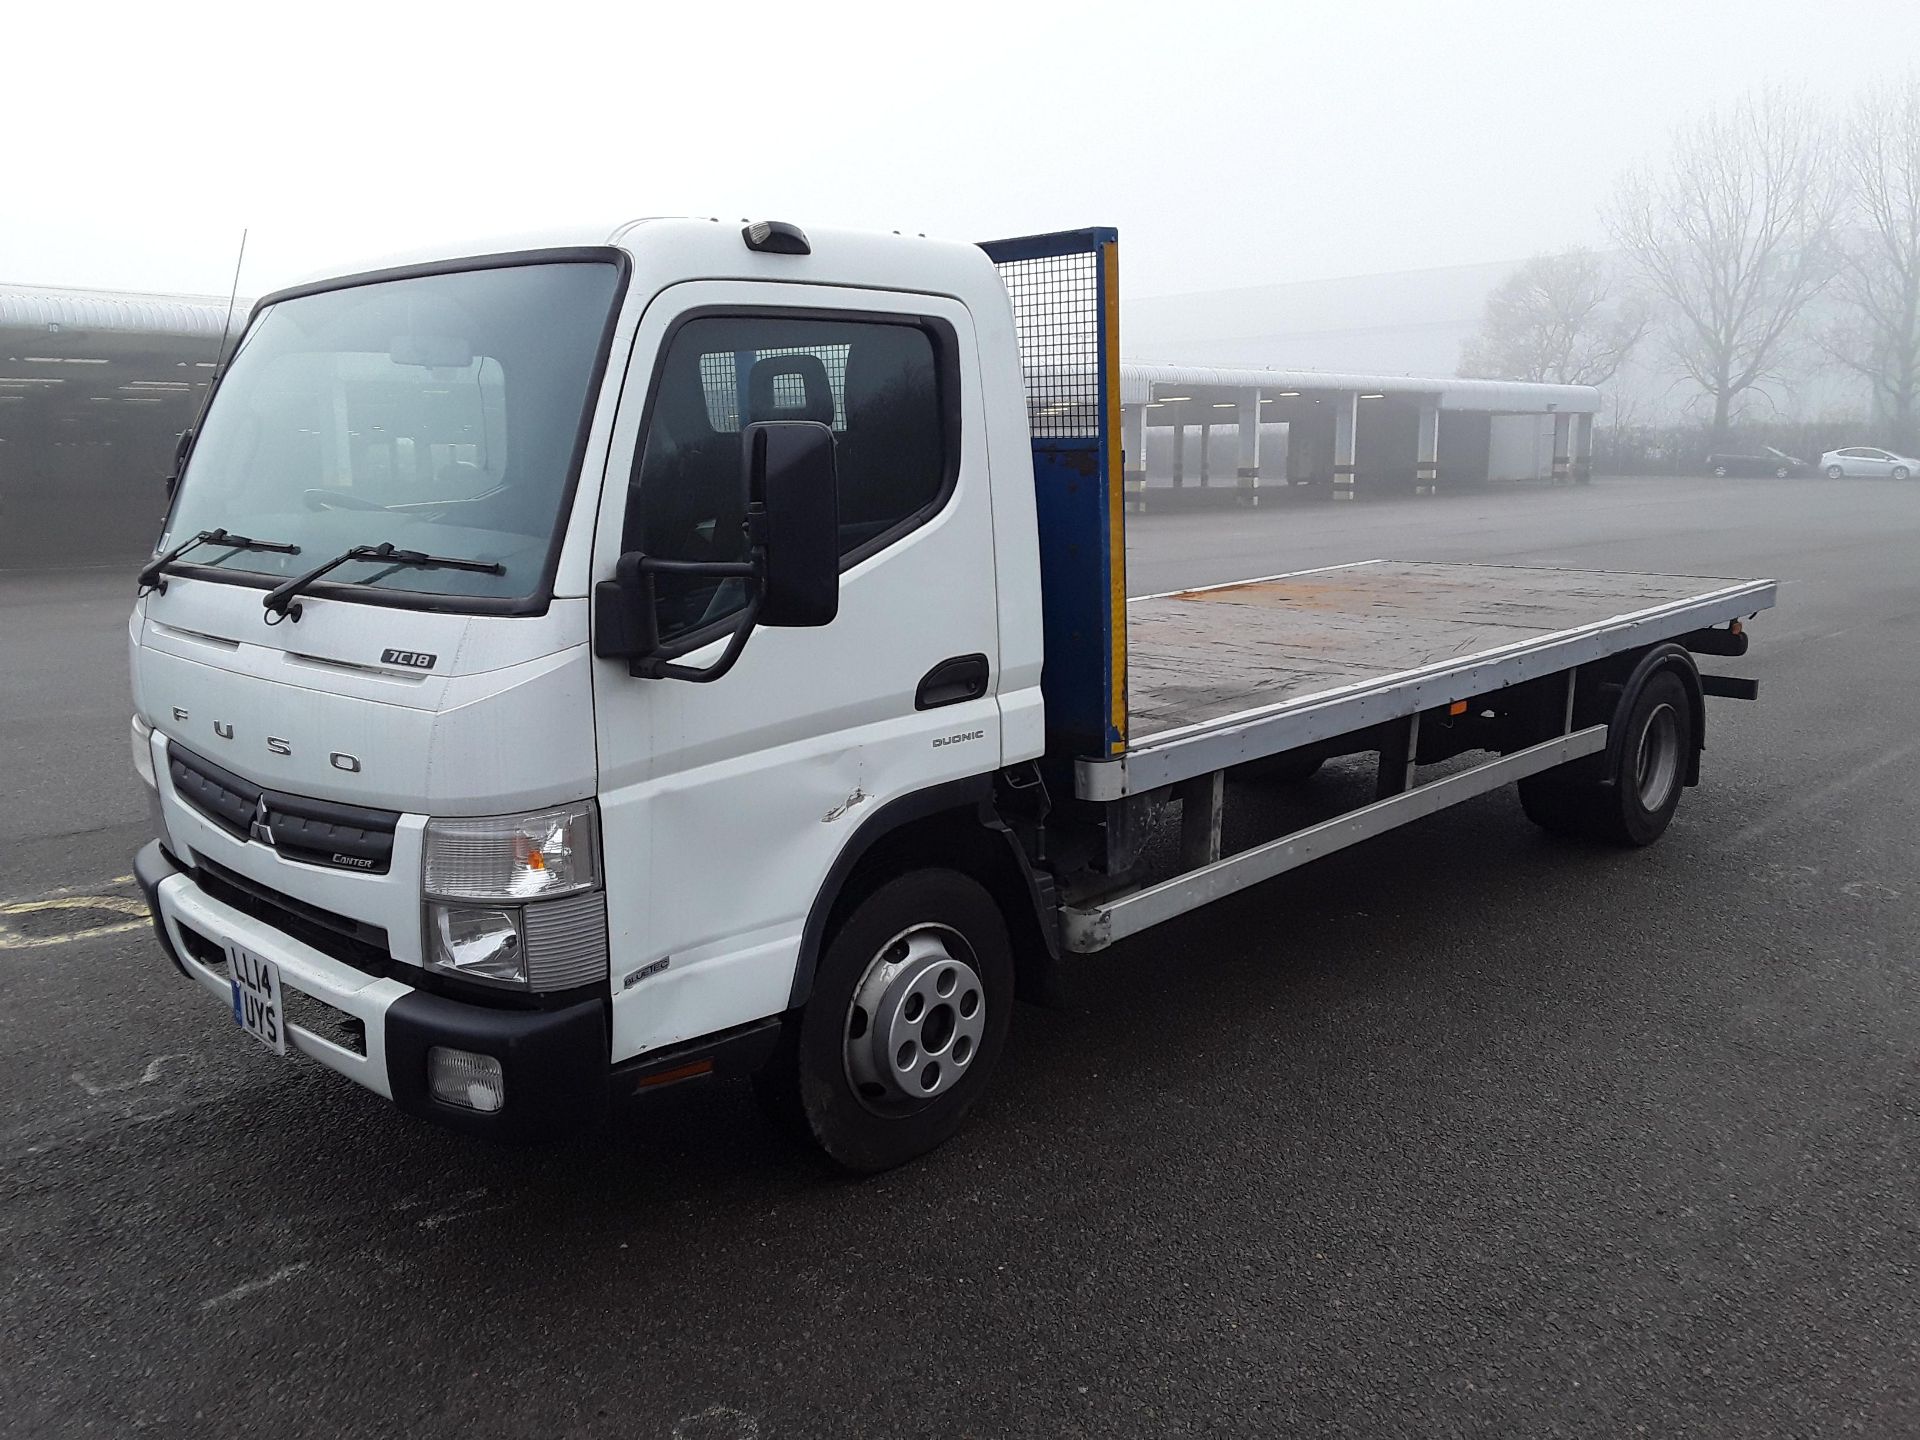 2014/14 REG MITSUBISHI FUSO CANTER 7C18 43 3.0 DIESEL AUTO, SHOWING 0 FORMER KEEPERS *PLUS VAT* - Image 2 of 8